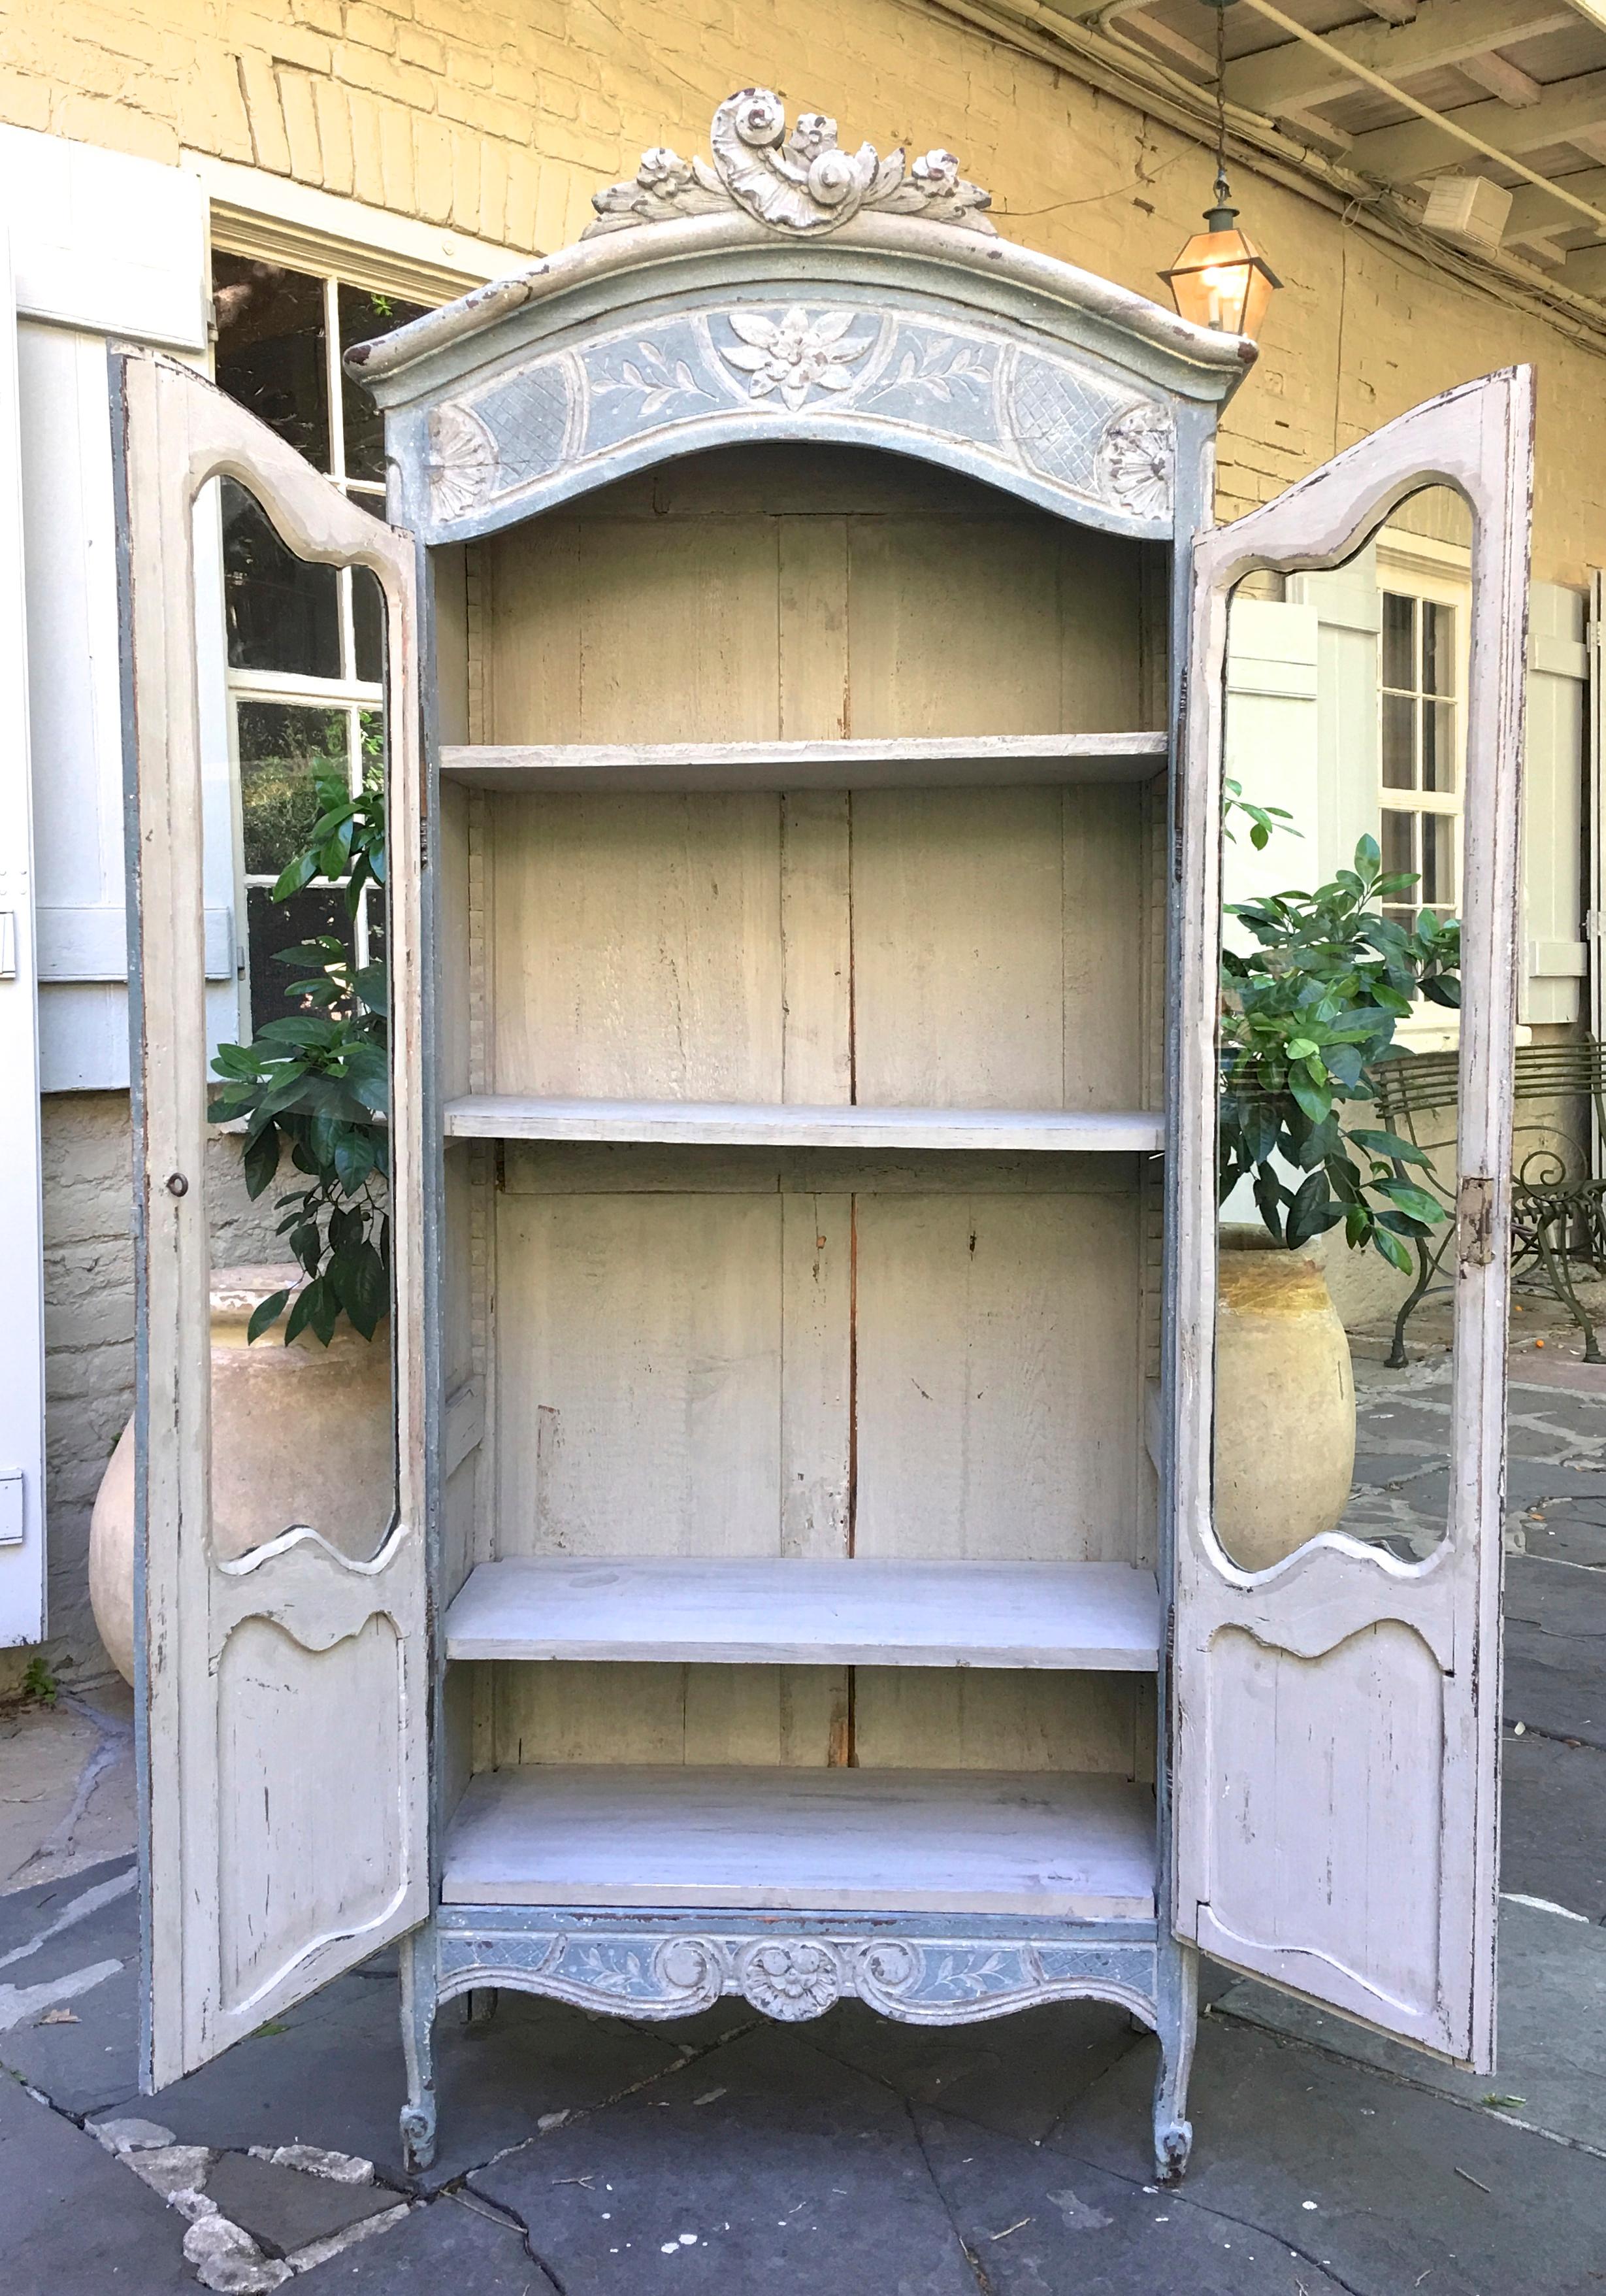 Antique French 19th century Petite Louis XV Style Biblioteque with detailed carvings, scrolled legs, cartouche, rare glass doors, and adjustable shelves. Perfect for a child's room or for displaying precious items.